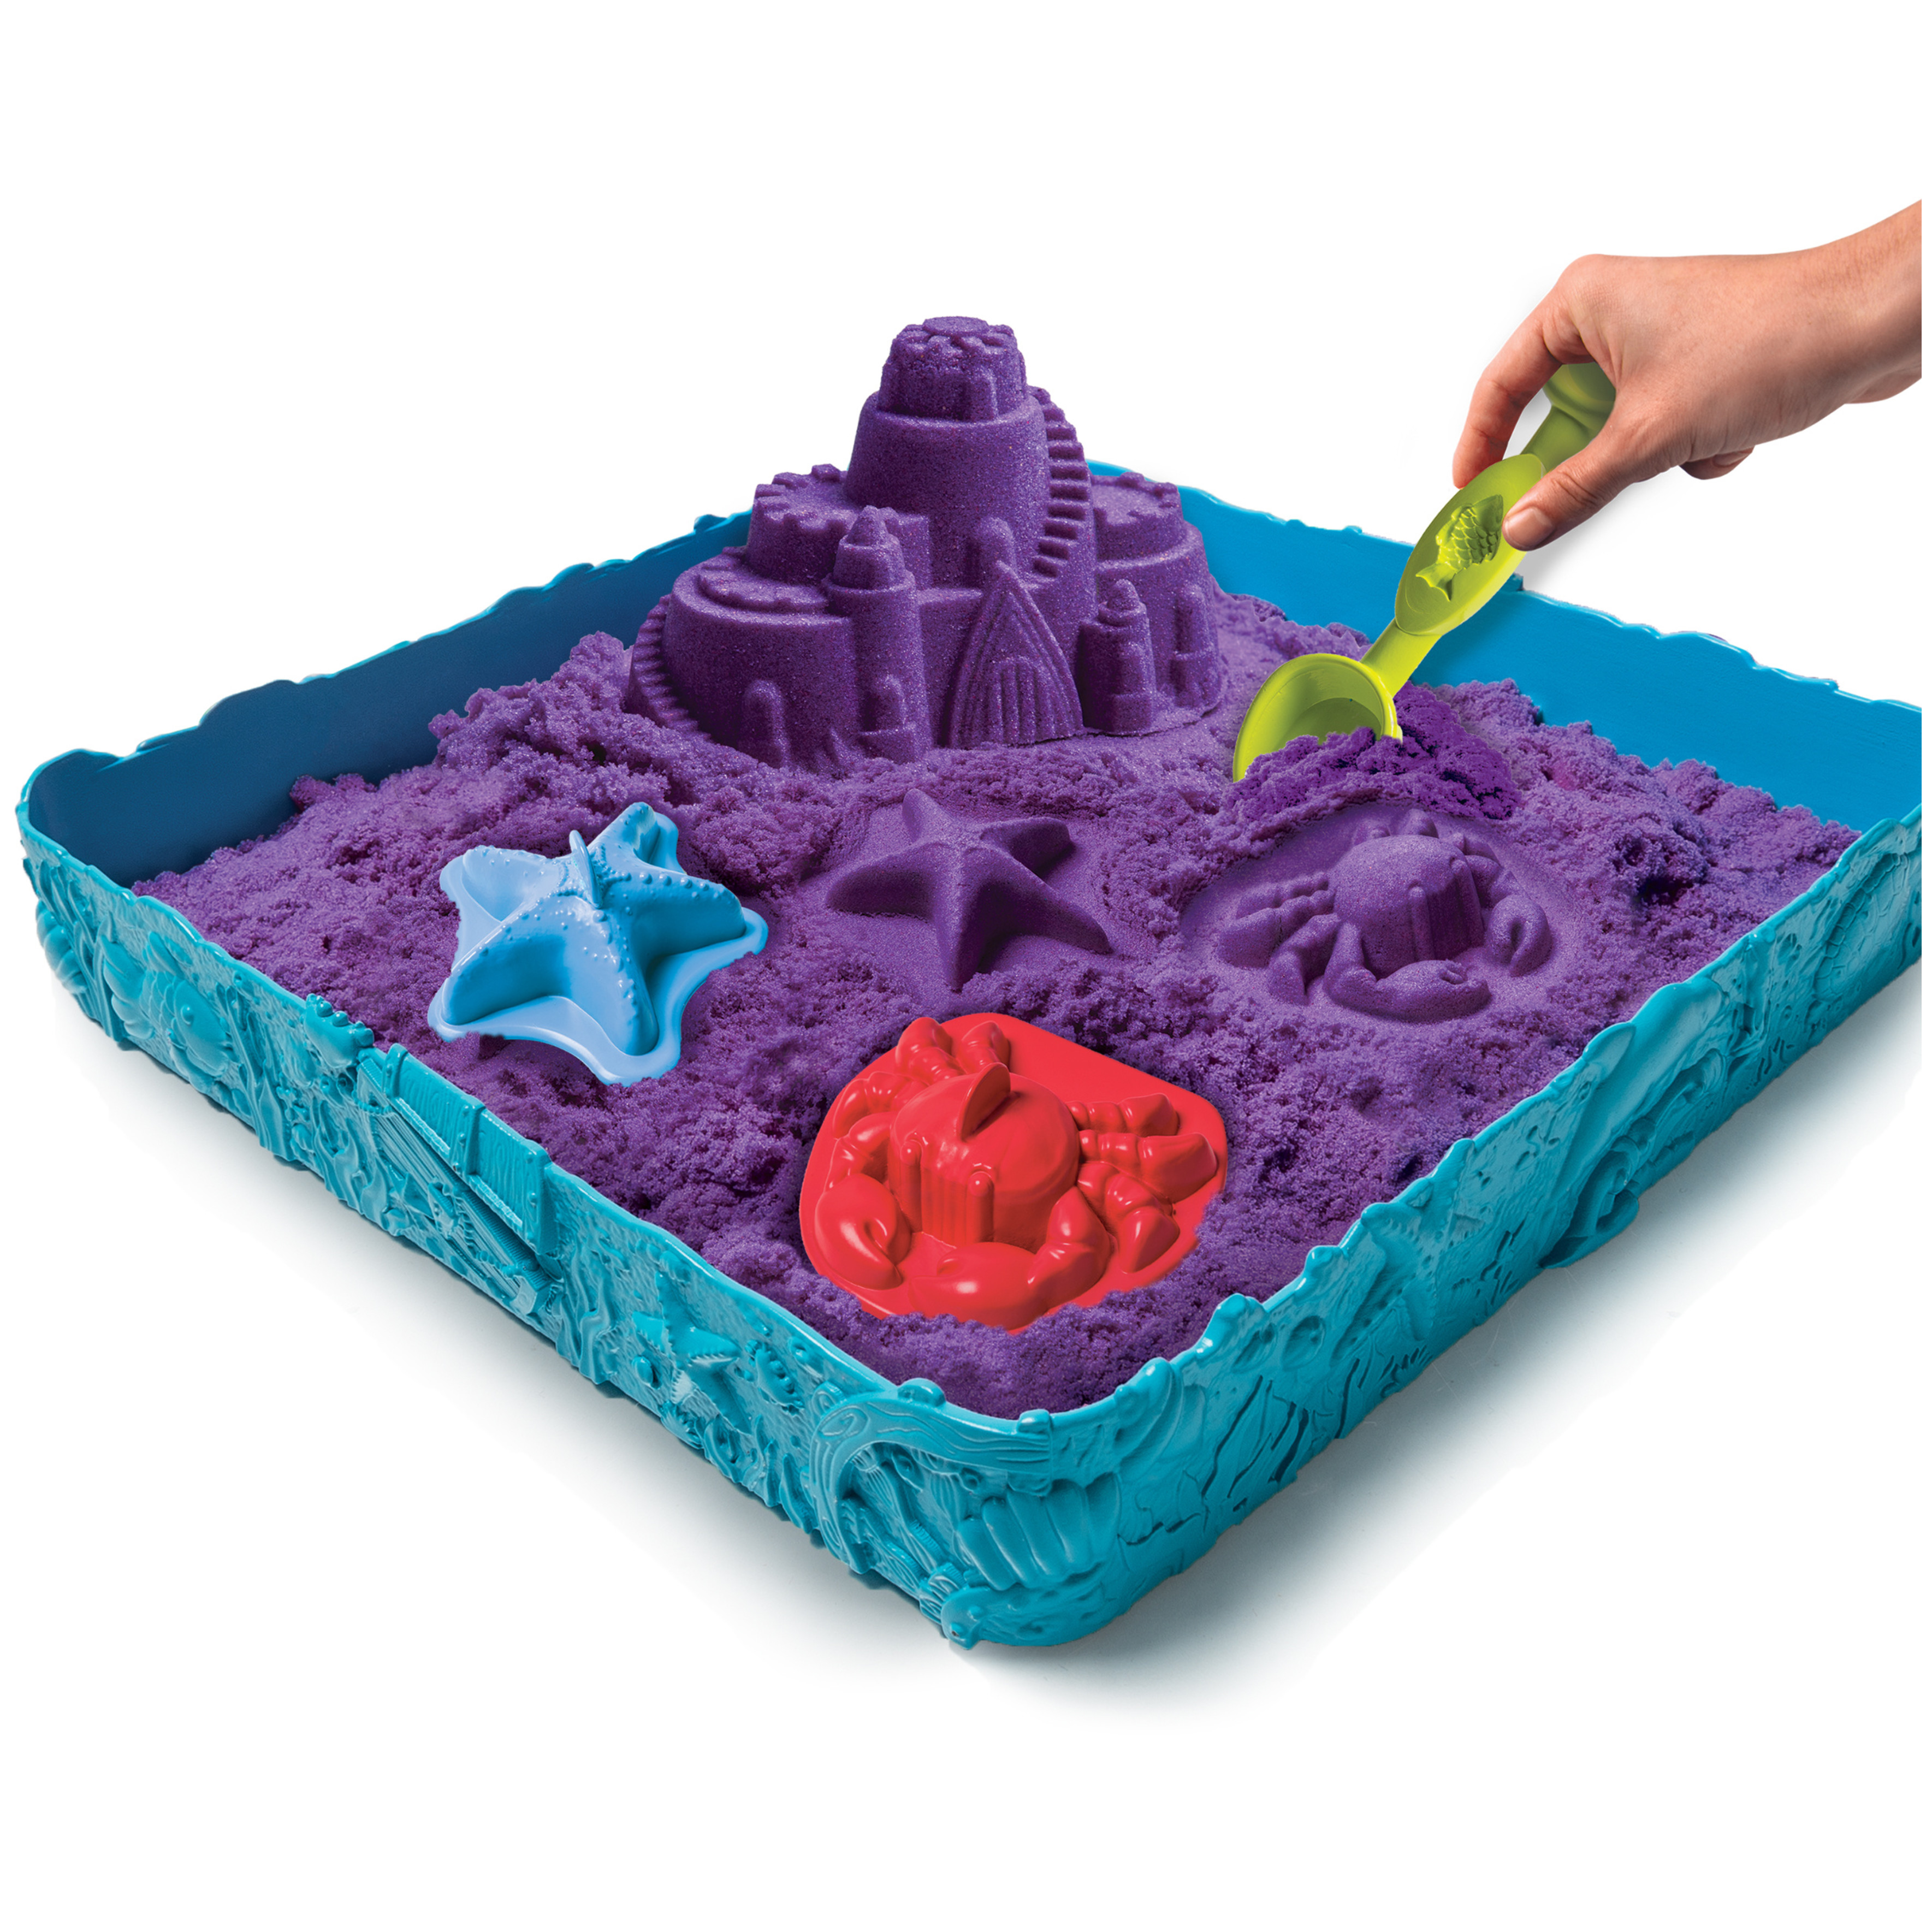 Kinetic Sand Sandcastle Set with 1lb of Kinetic Sand and Tools and Molds (Color May Vary) - image 5 of 9